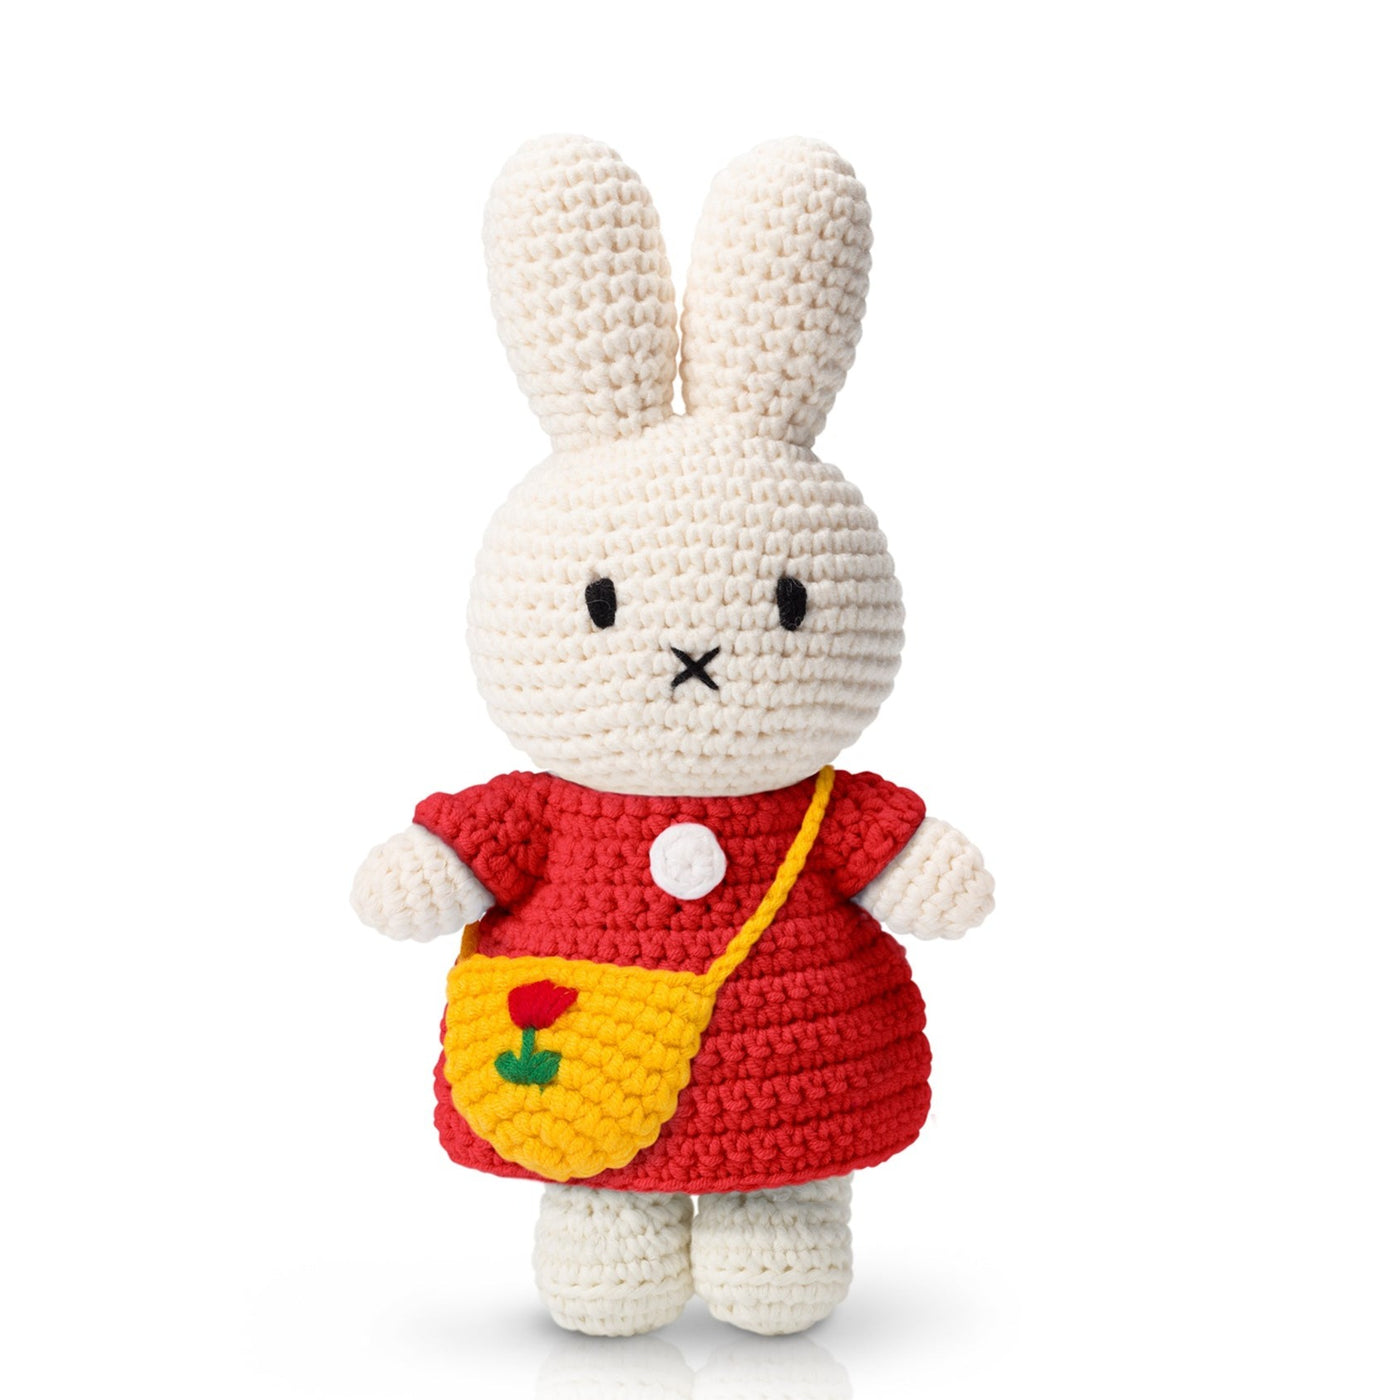 Crocheted Miffy with Red Dress Tulip Bag